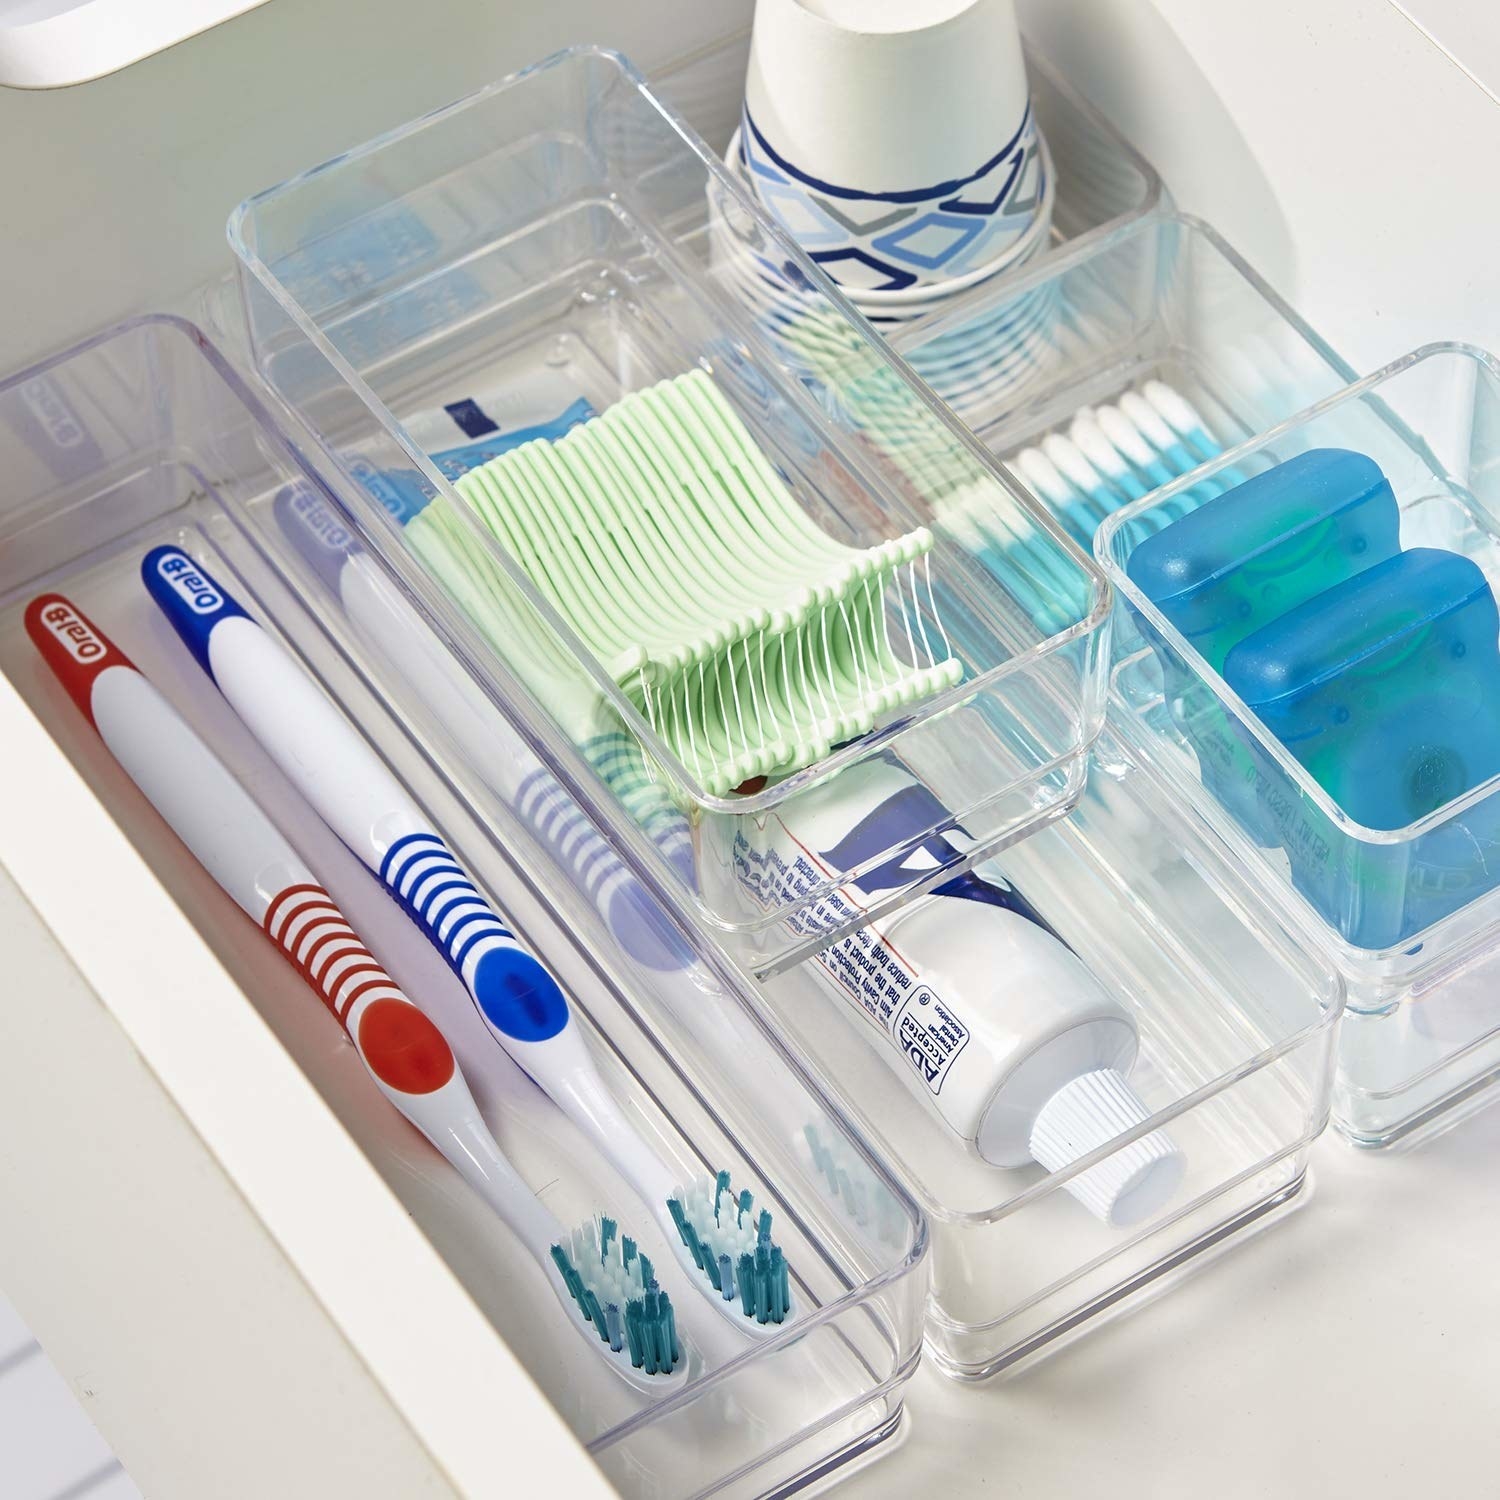 The organizers in a drawer holding toothbrushes, toothpaste, floss, cotton swabs, and cups